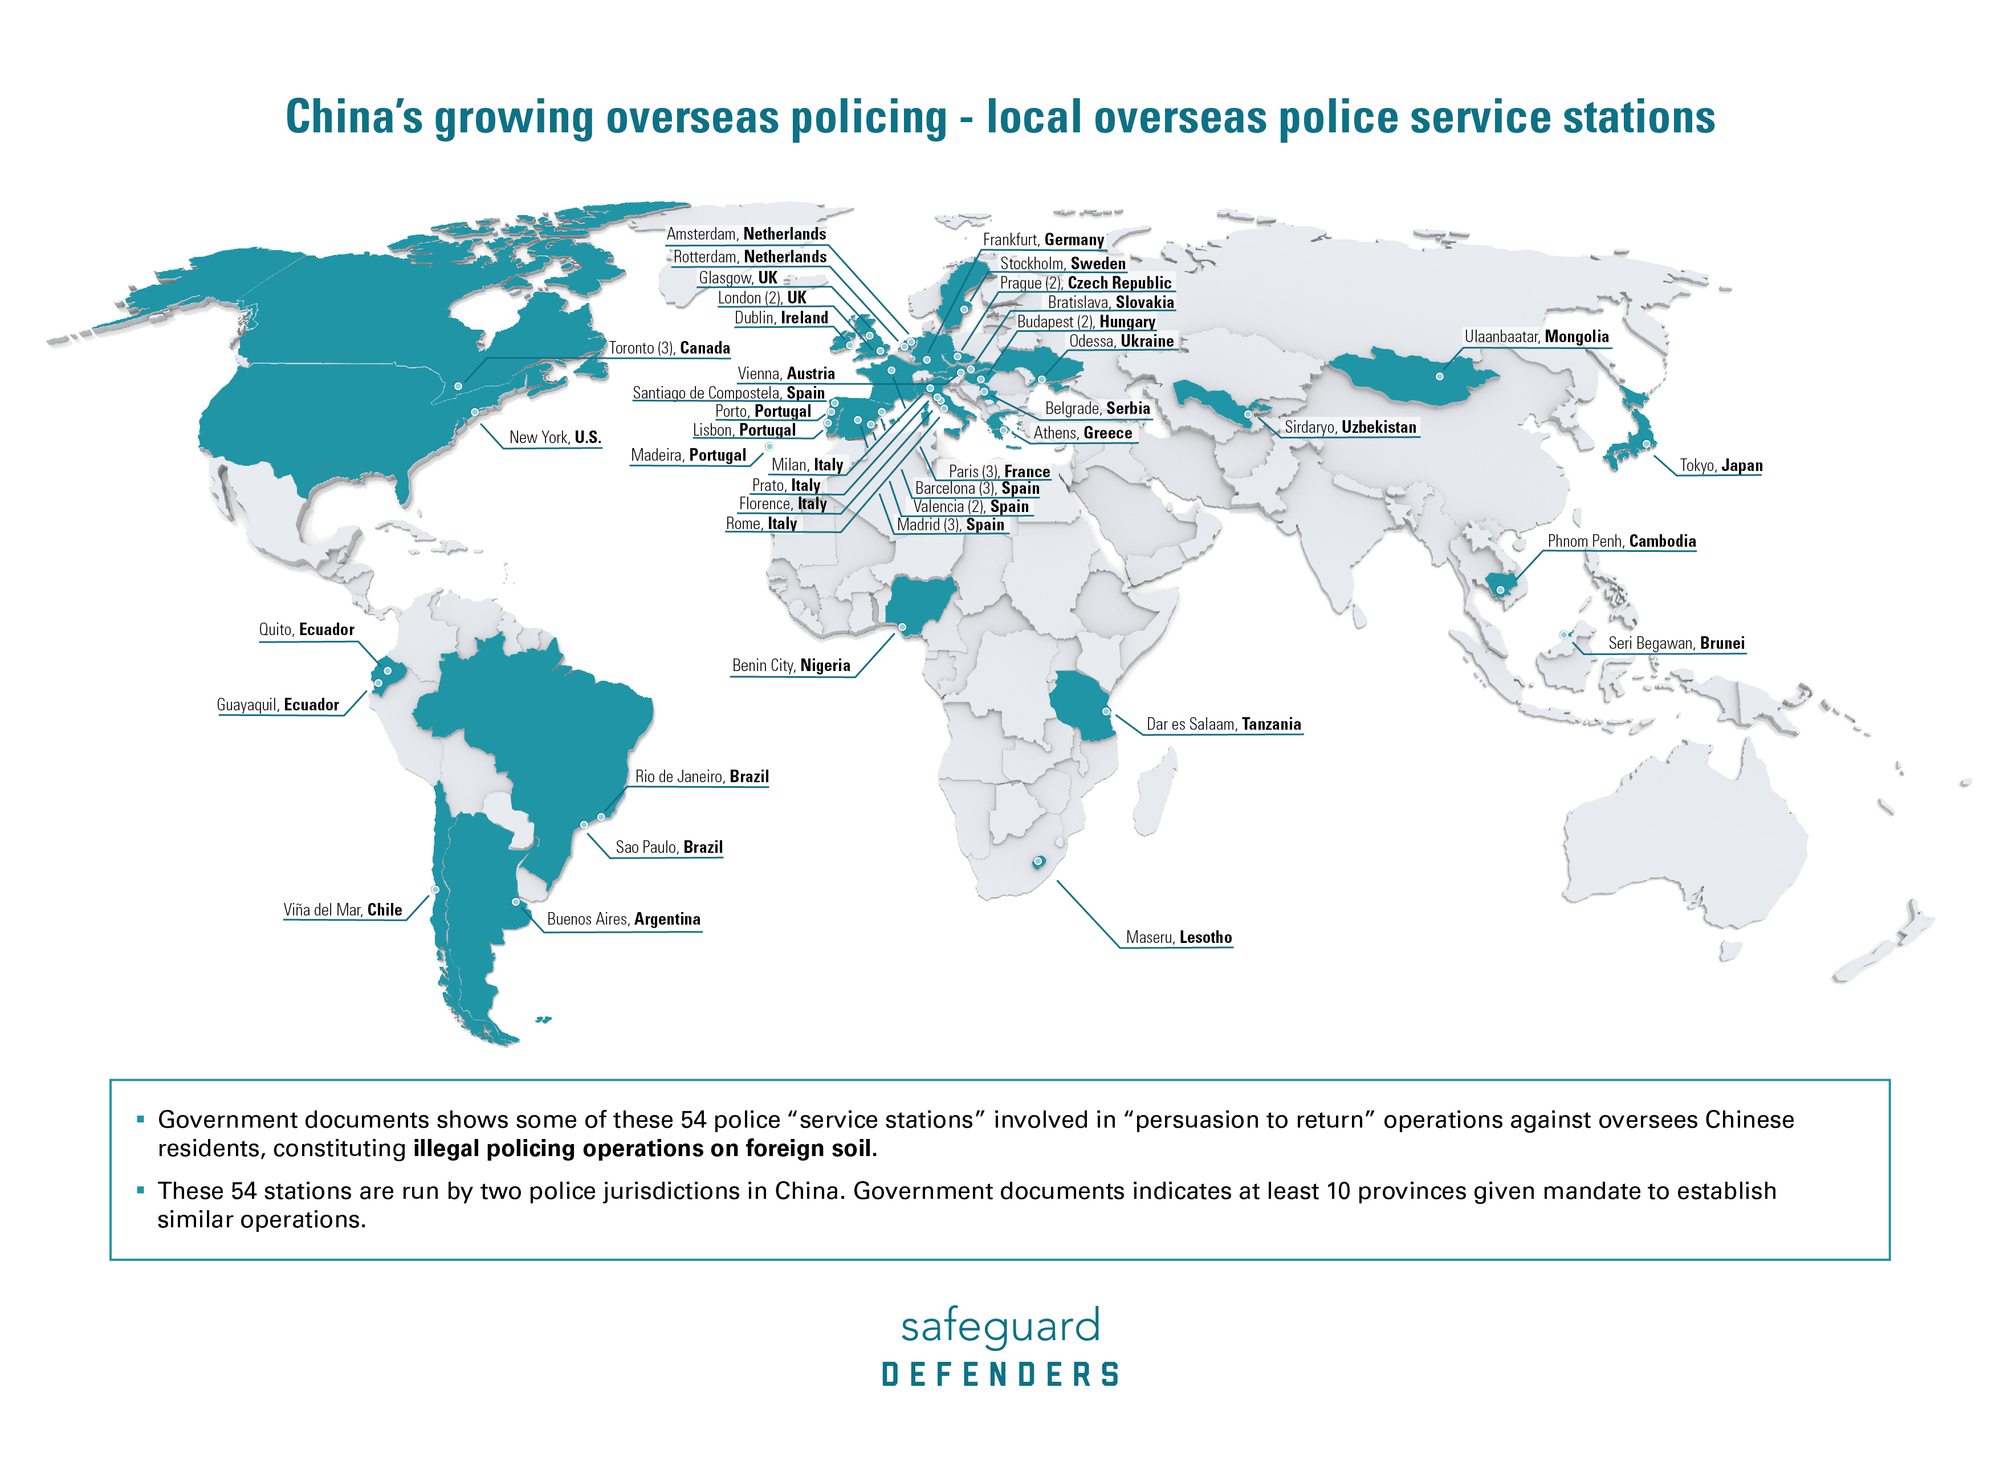 At least 110 “overseas police service stations” coerce targets into returning to China, likely violating international and national laws